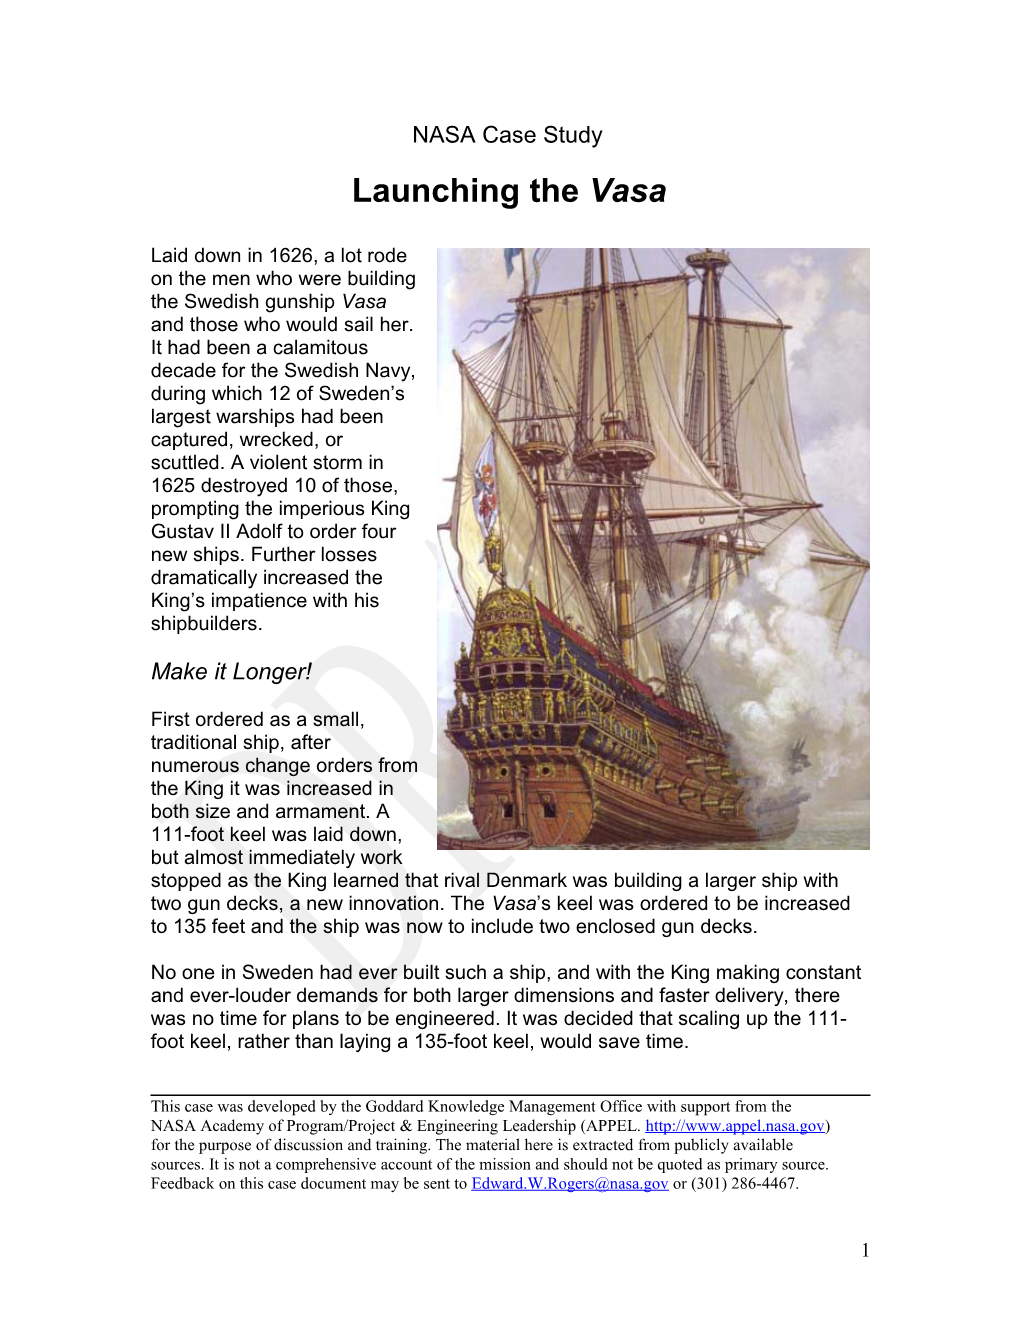 The Loss of the Vasa in 1628 Capped a Calamitous Decade for the Swedish Navy